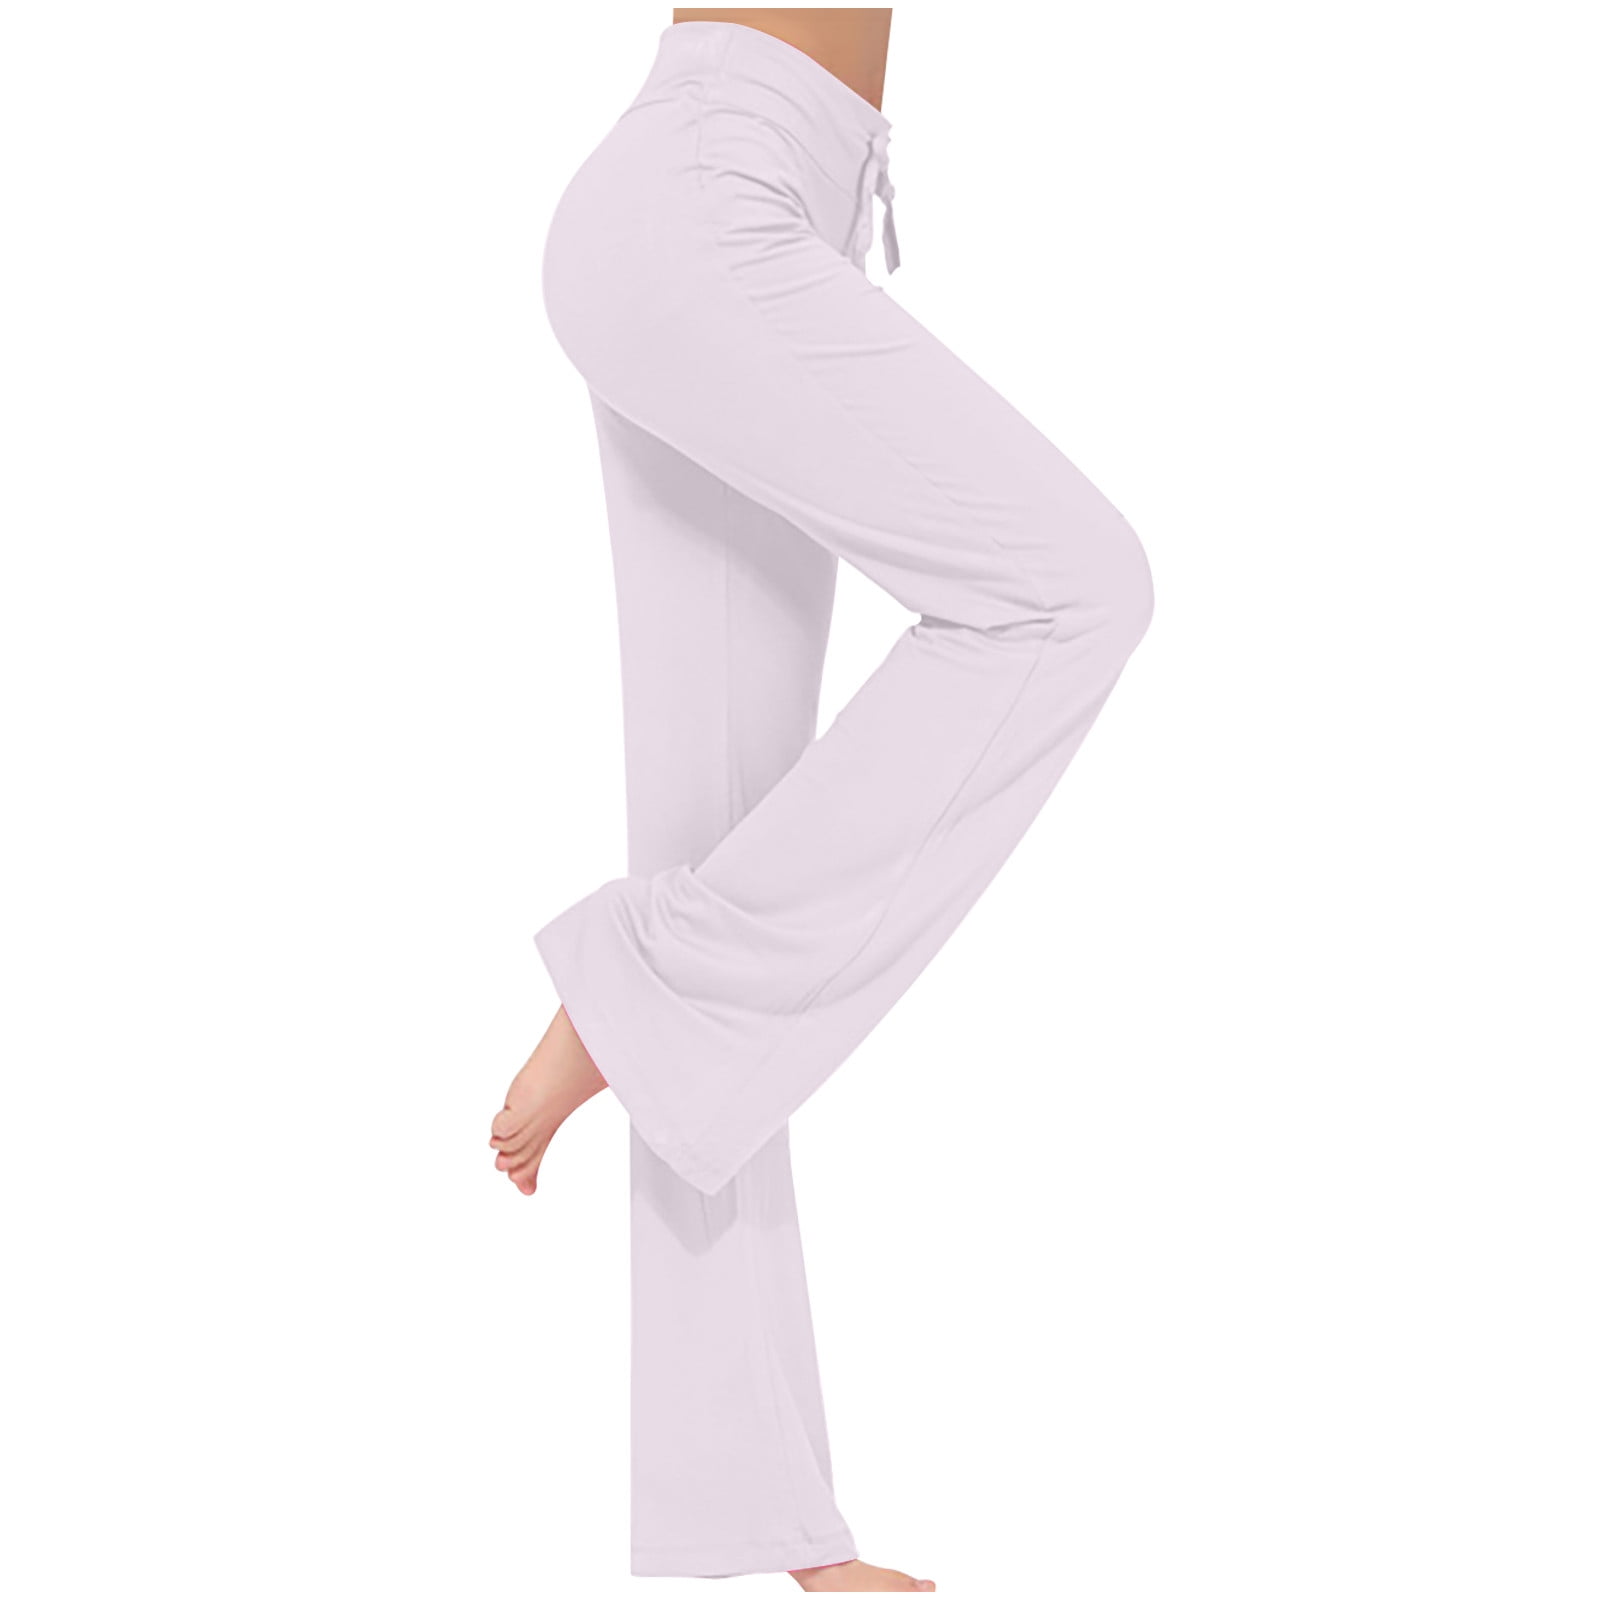 Lu Logo Wide Leg Active Pants: Loose Fit Flared Trousers For Women, High  Waist Push Up Leggings For Gym, Sports, And Fitness Nude High Leg Push Up  Pants For Yoga And Leisure